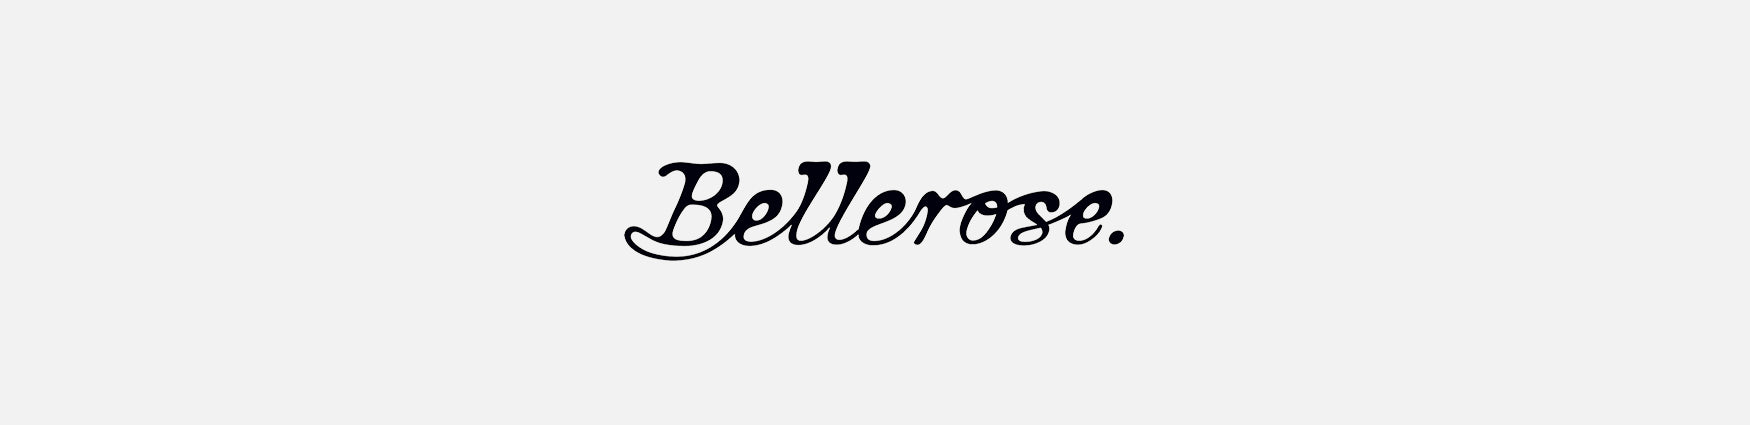 BELLEROSE | Bellerose Ladies Clothing and Fashion | Roo's Beach – Roo's ...